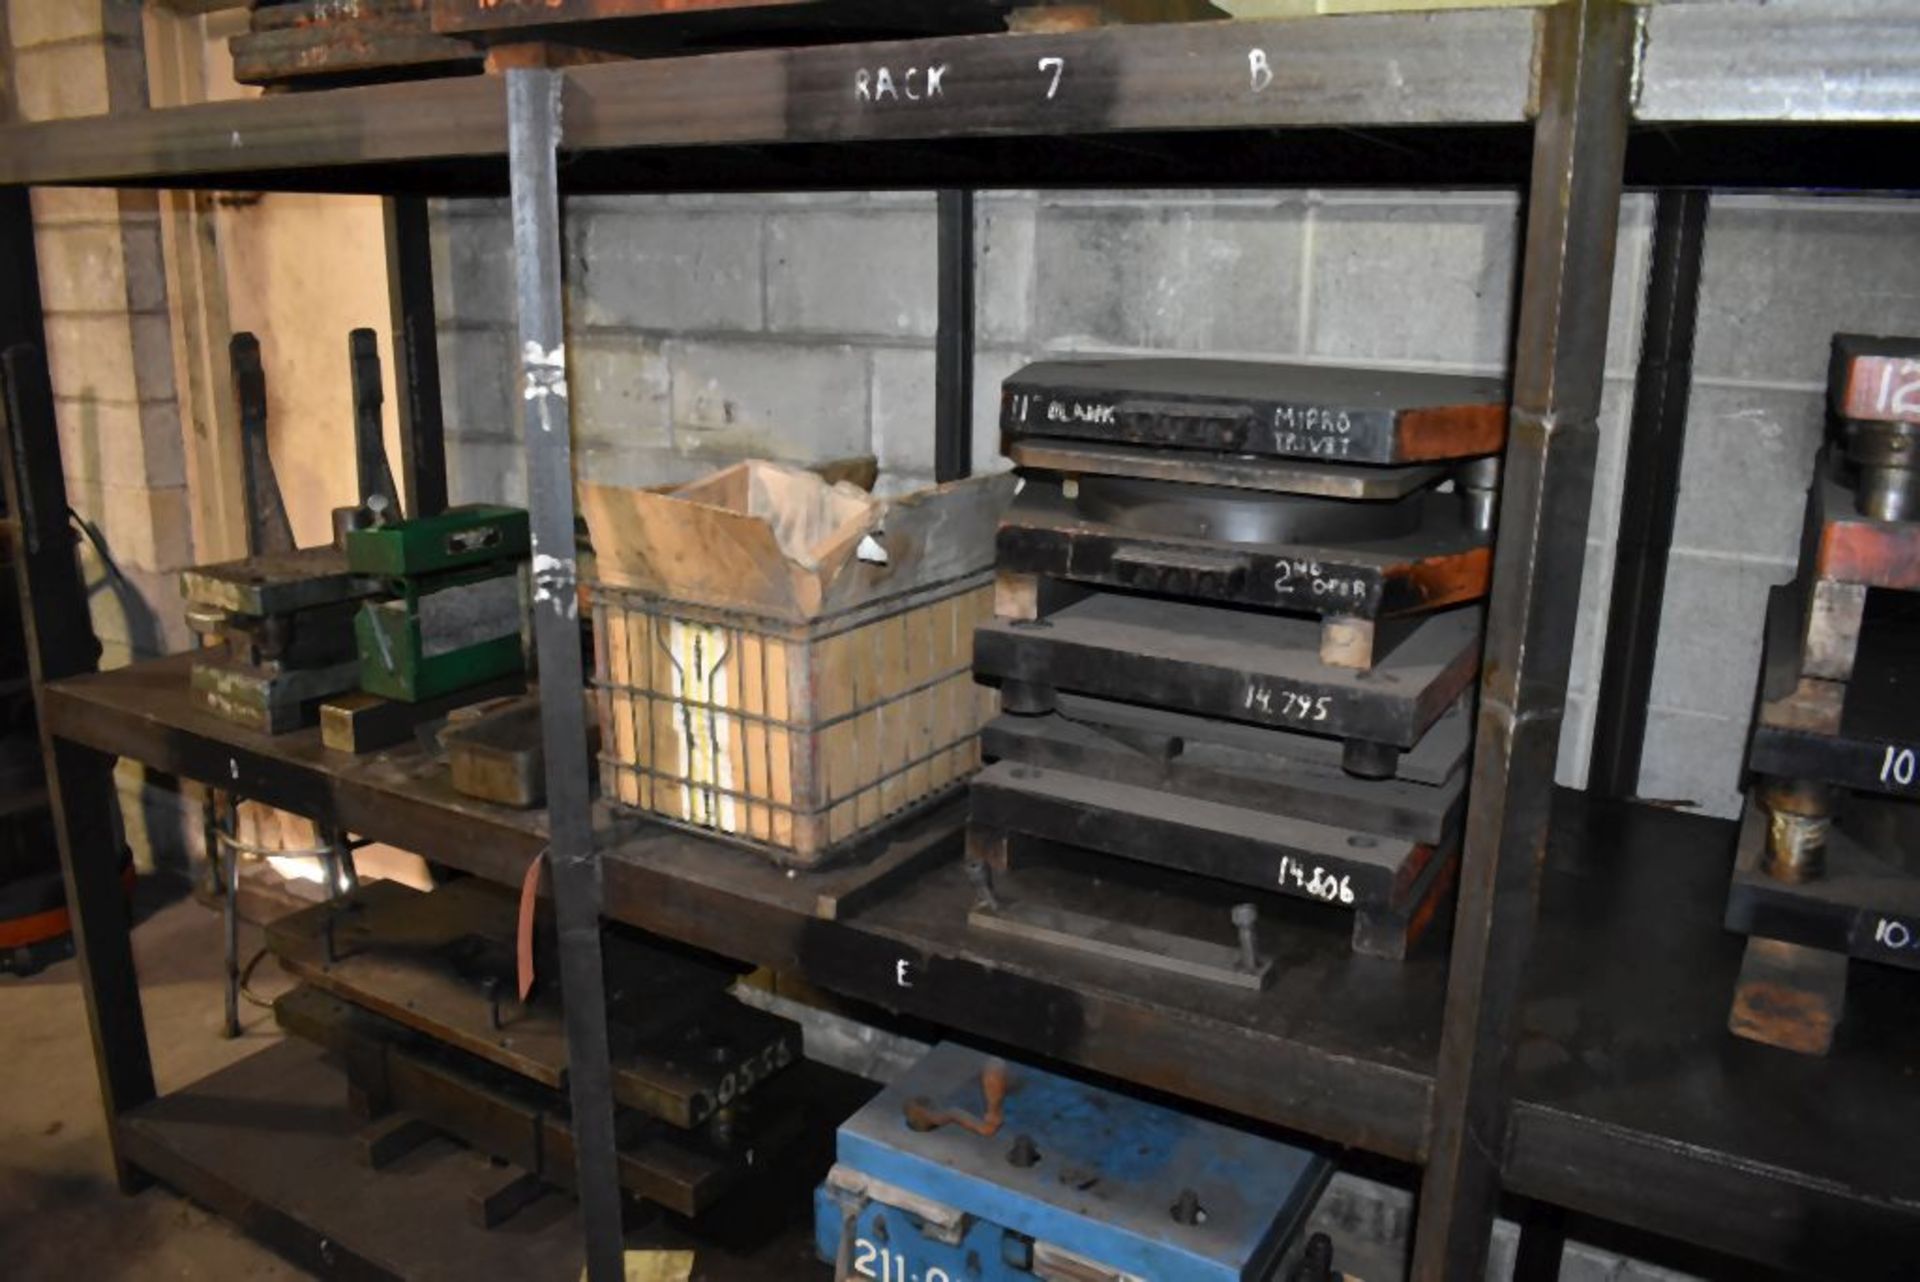 HEAVY DUTY WELDED STEEL SHELVING UNIT, THREE TIER, INCLUDES CONTENTS, 10'2"L x 32"D x 68"H - Image 3 of 5